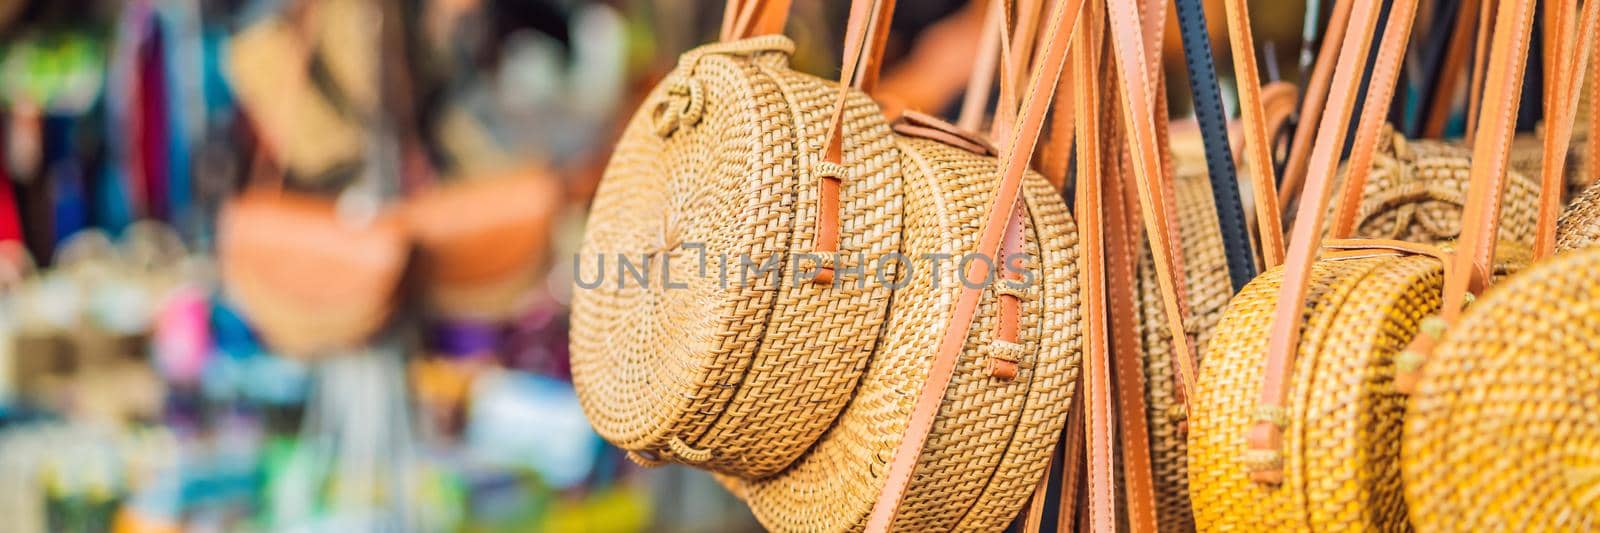 Typical souvenirs and handicrafts of Bali at the famous Ubud Market. BANNER, LONG FORMAT